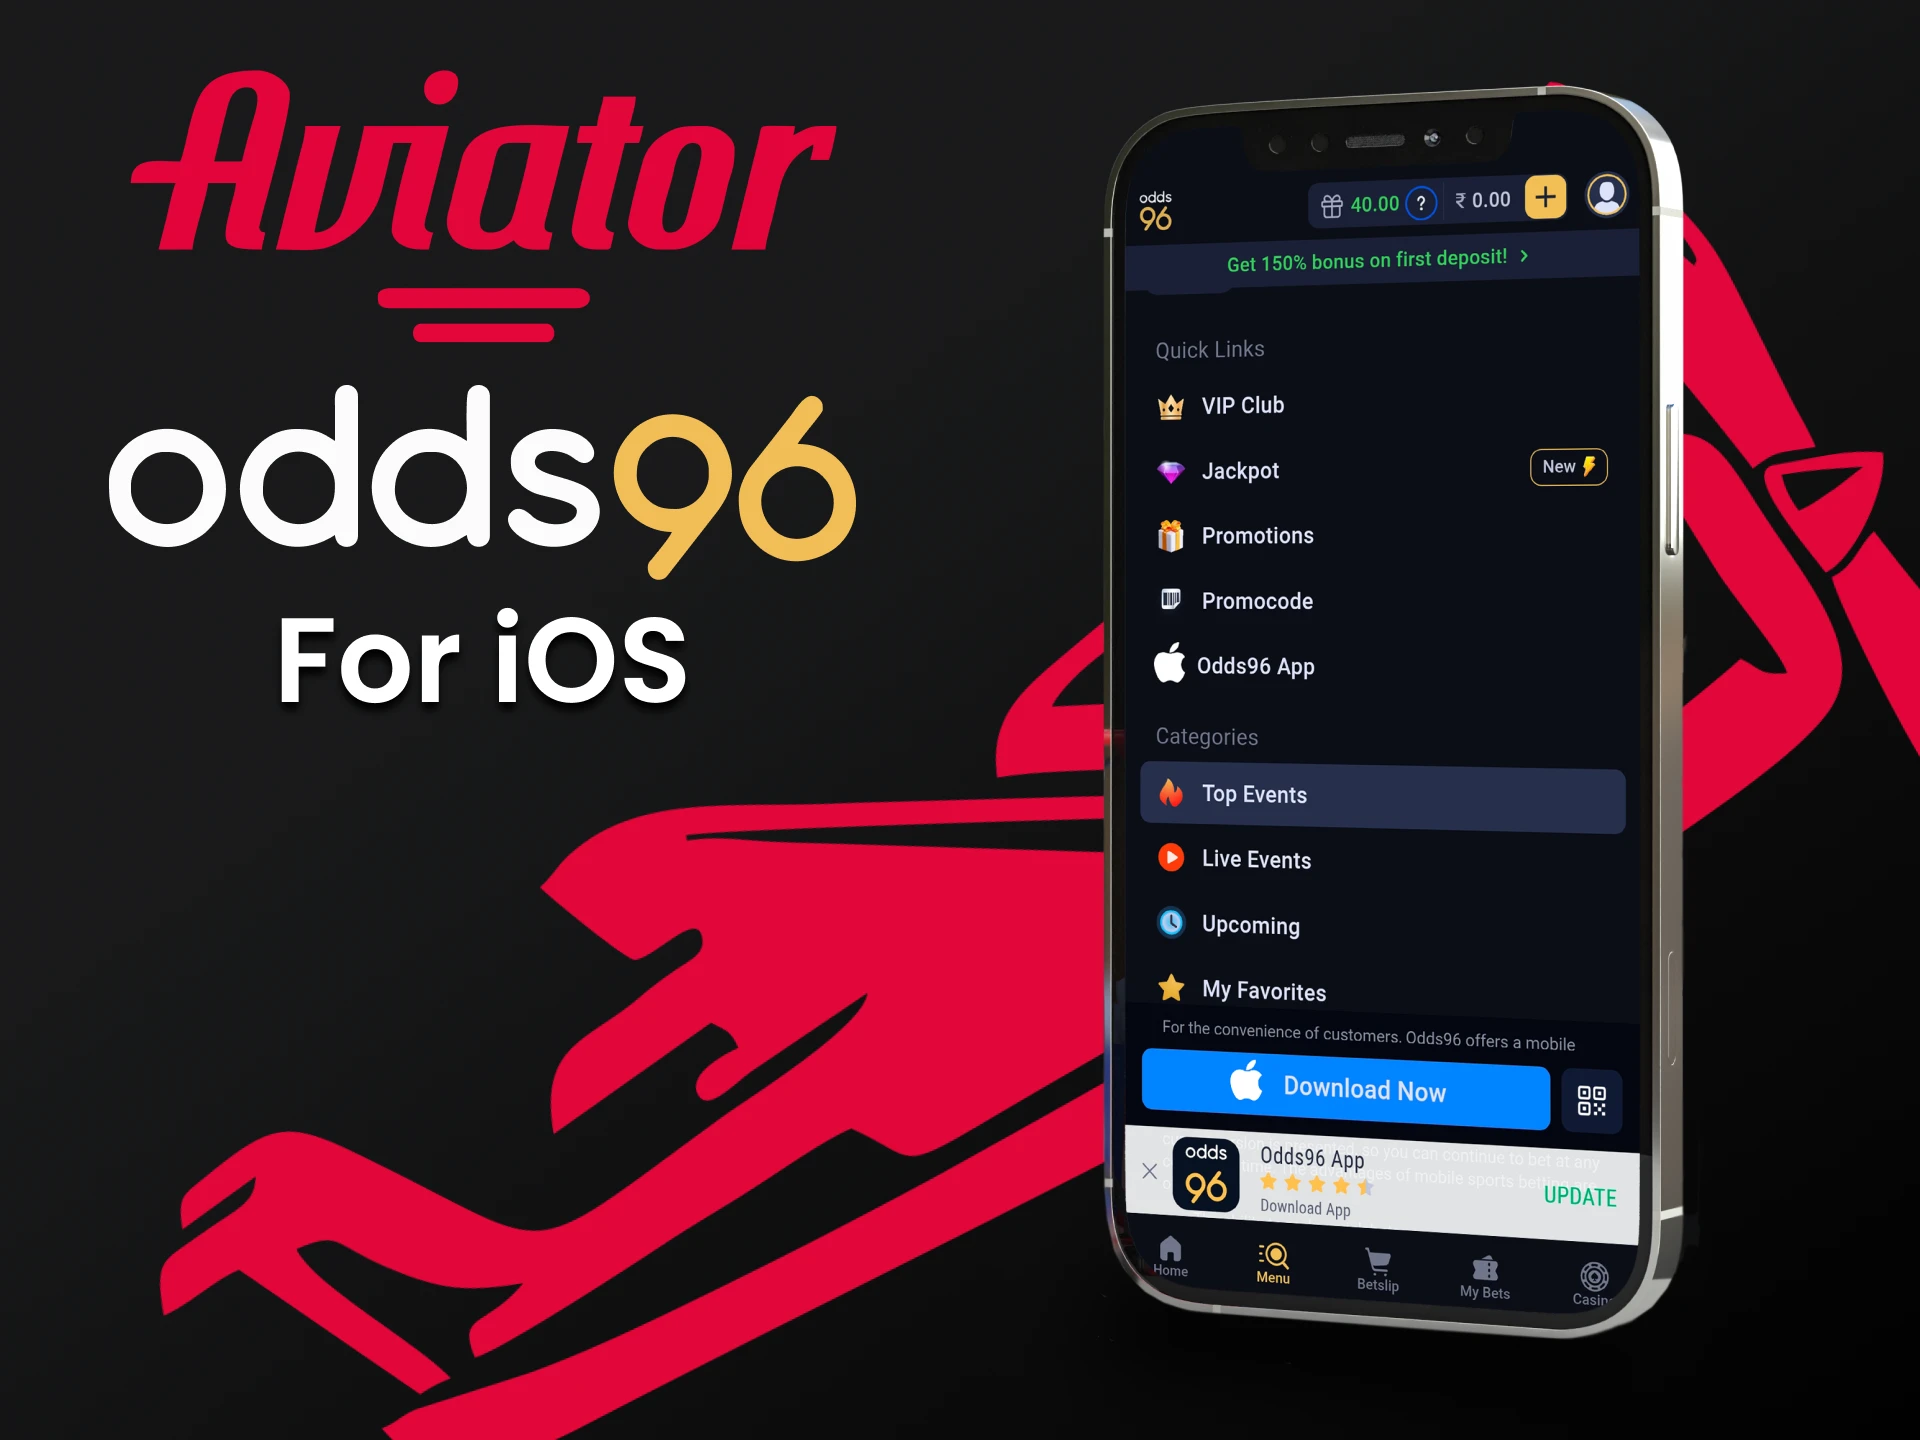 Download the Odds96 app on your iOS device to play Aviator.